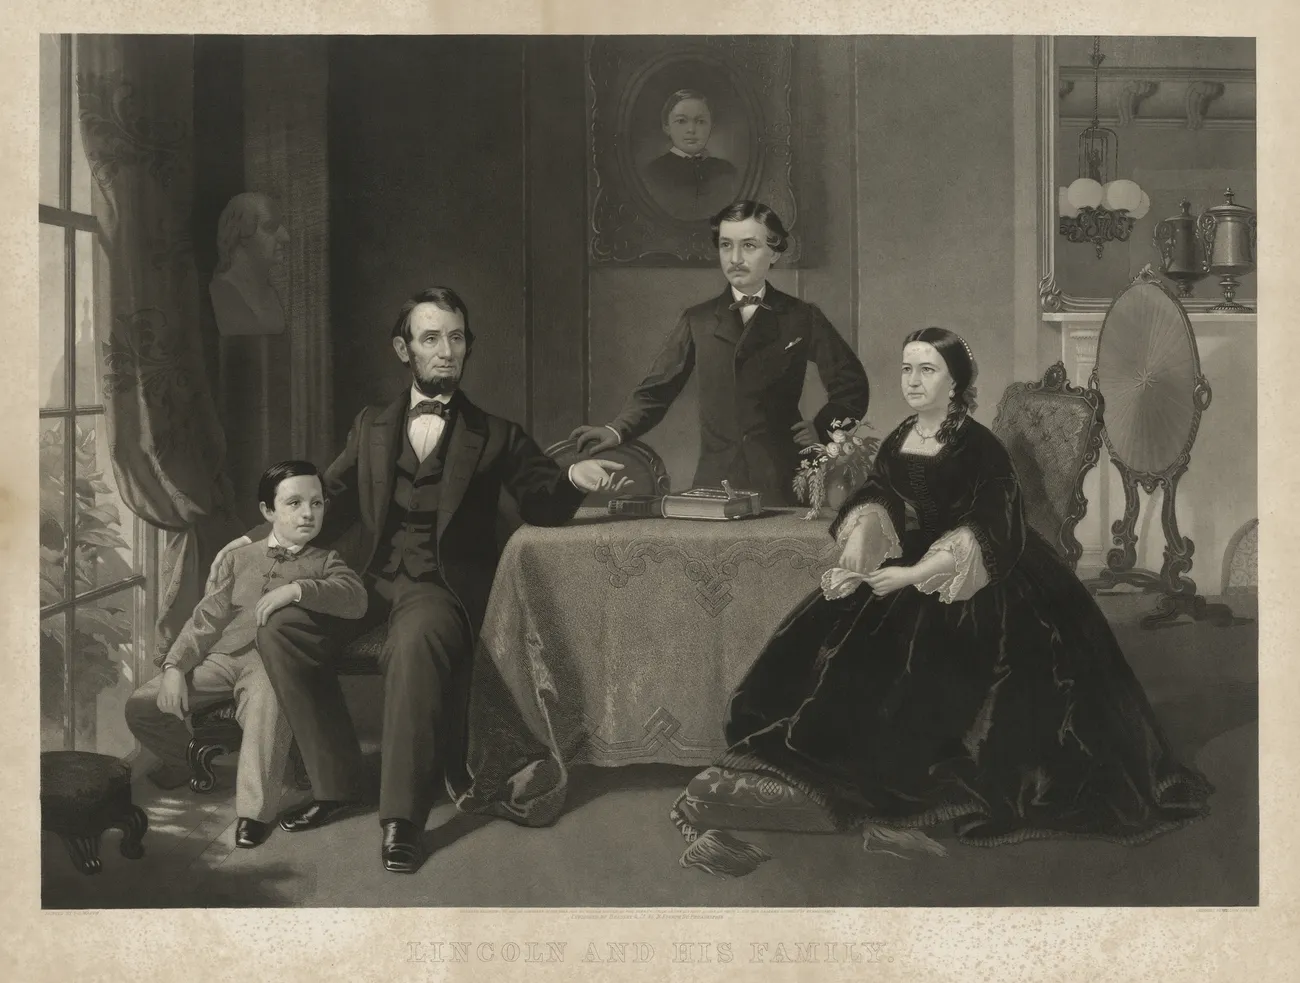 Photo of Abraham Lincoln, Mary Todd Lincoln and their son. 